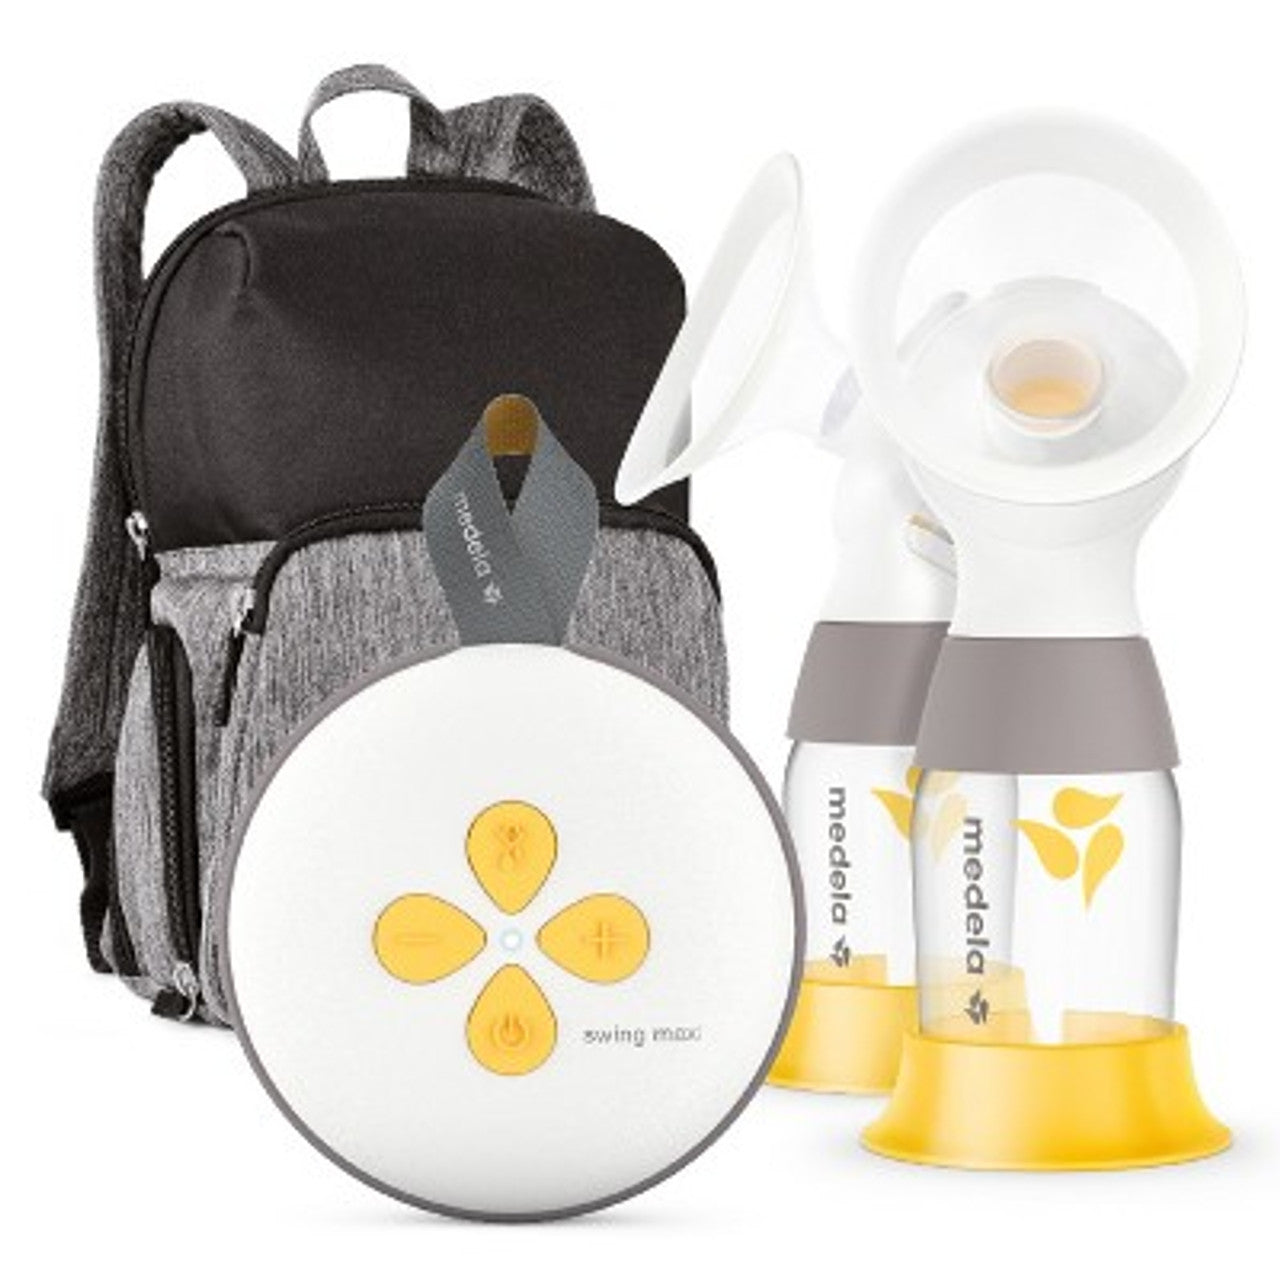 New - Medela Swing Maxi Double Electric Breast Pump